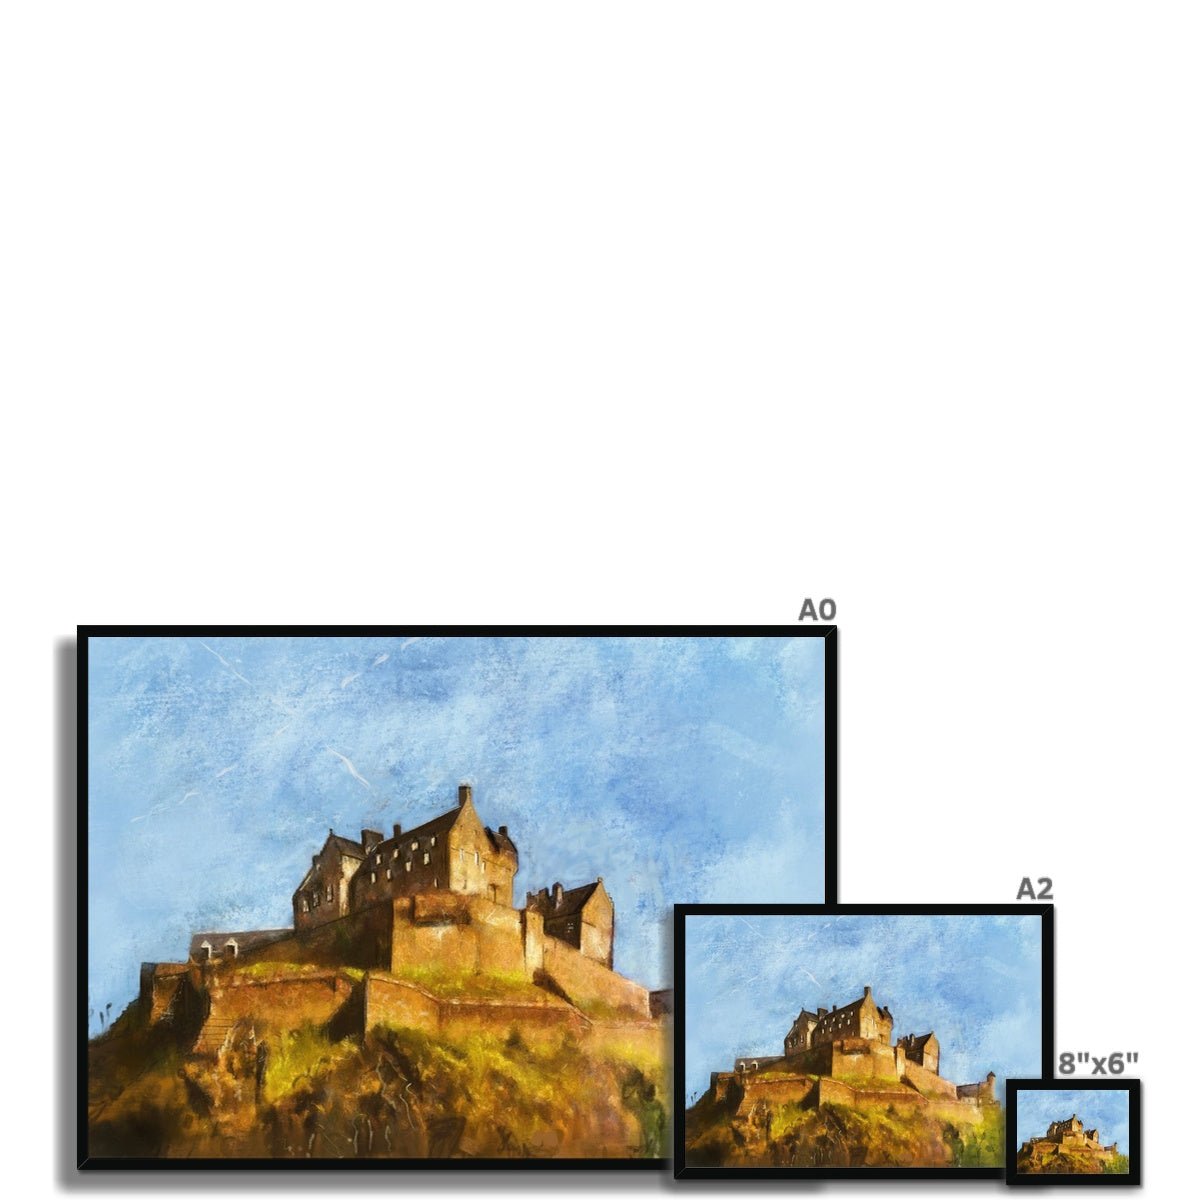 Edinburgh Castle Painting | Framed Prints From Scotland-Framed Prints-Historic & Iconic Scotland Art Gallery-Paintings, Prints, Homeware, Art Gifts From Scotland By Scottish Artist Kevin Hunter